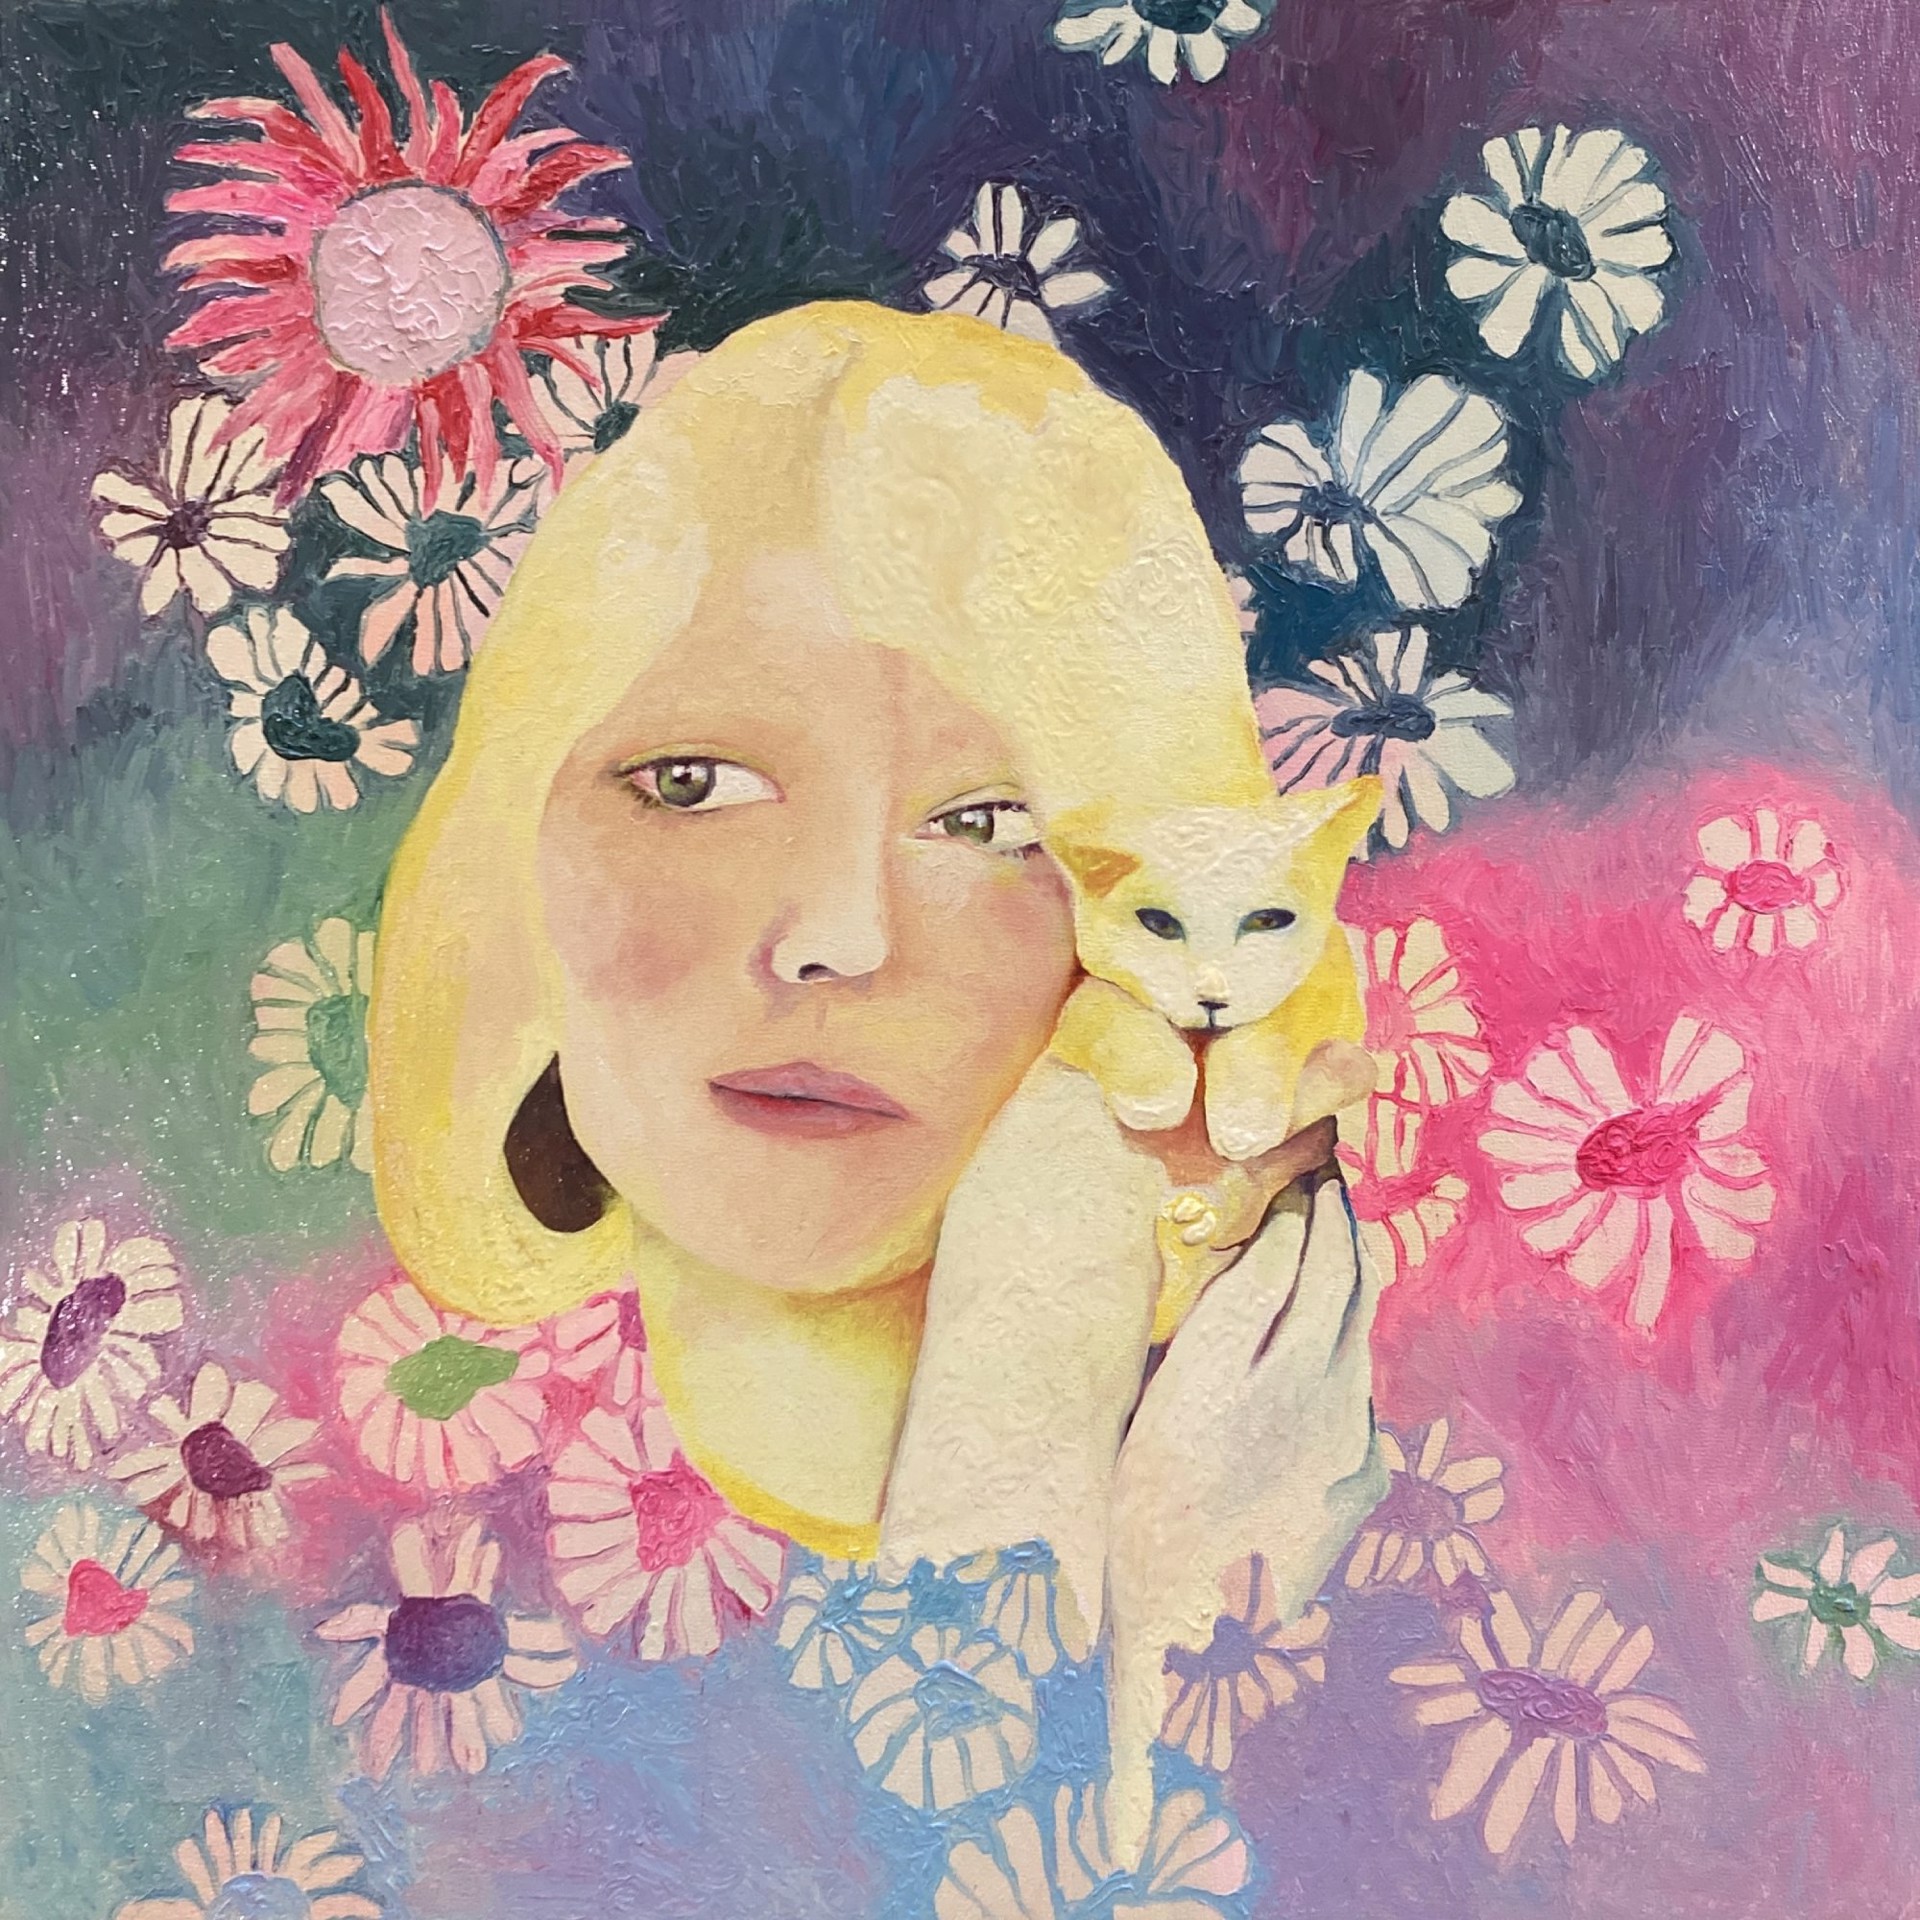 "Girl With Kitten" by Allison Moyers by Art One Foundation